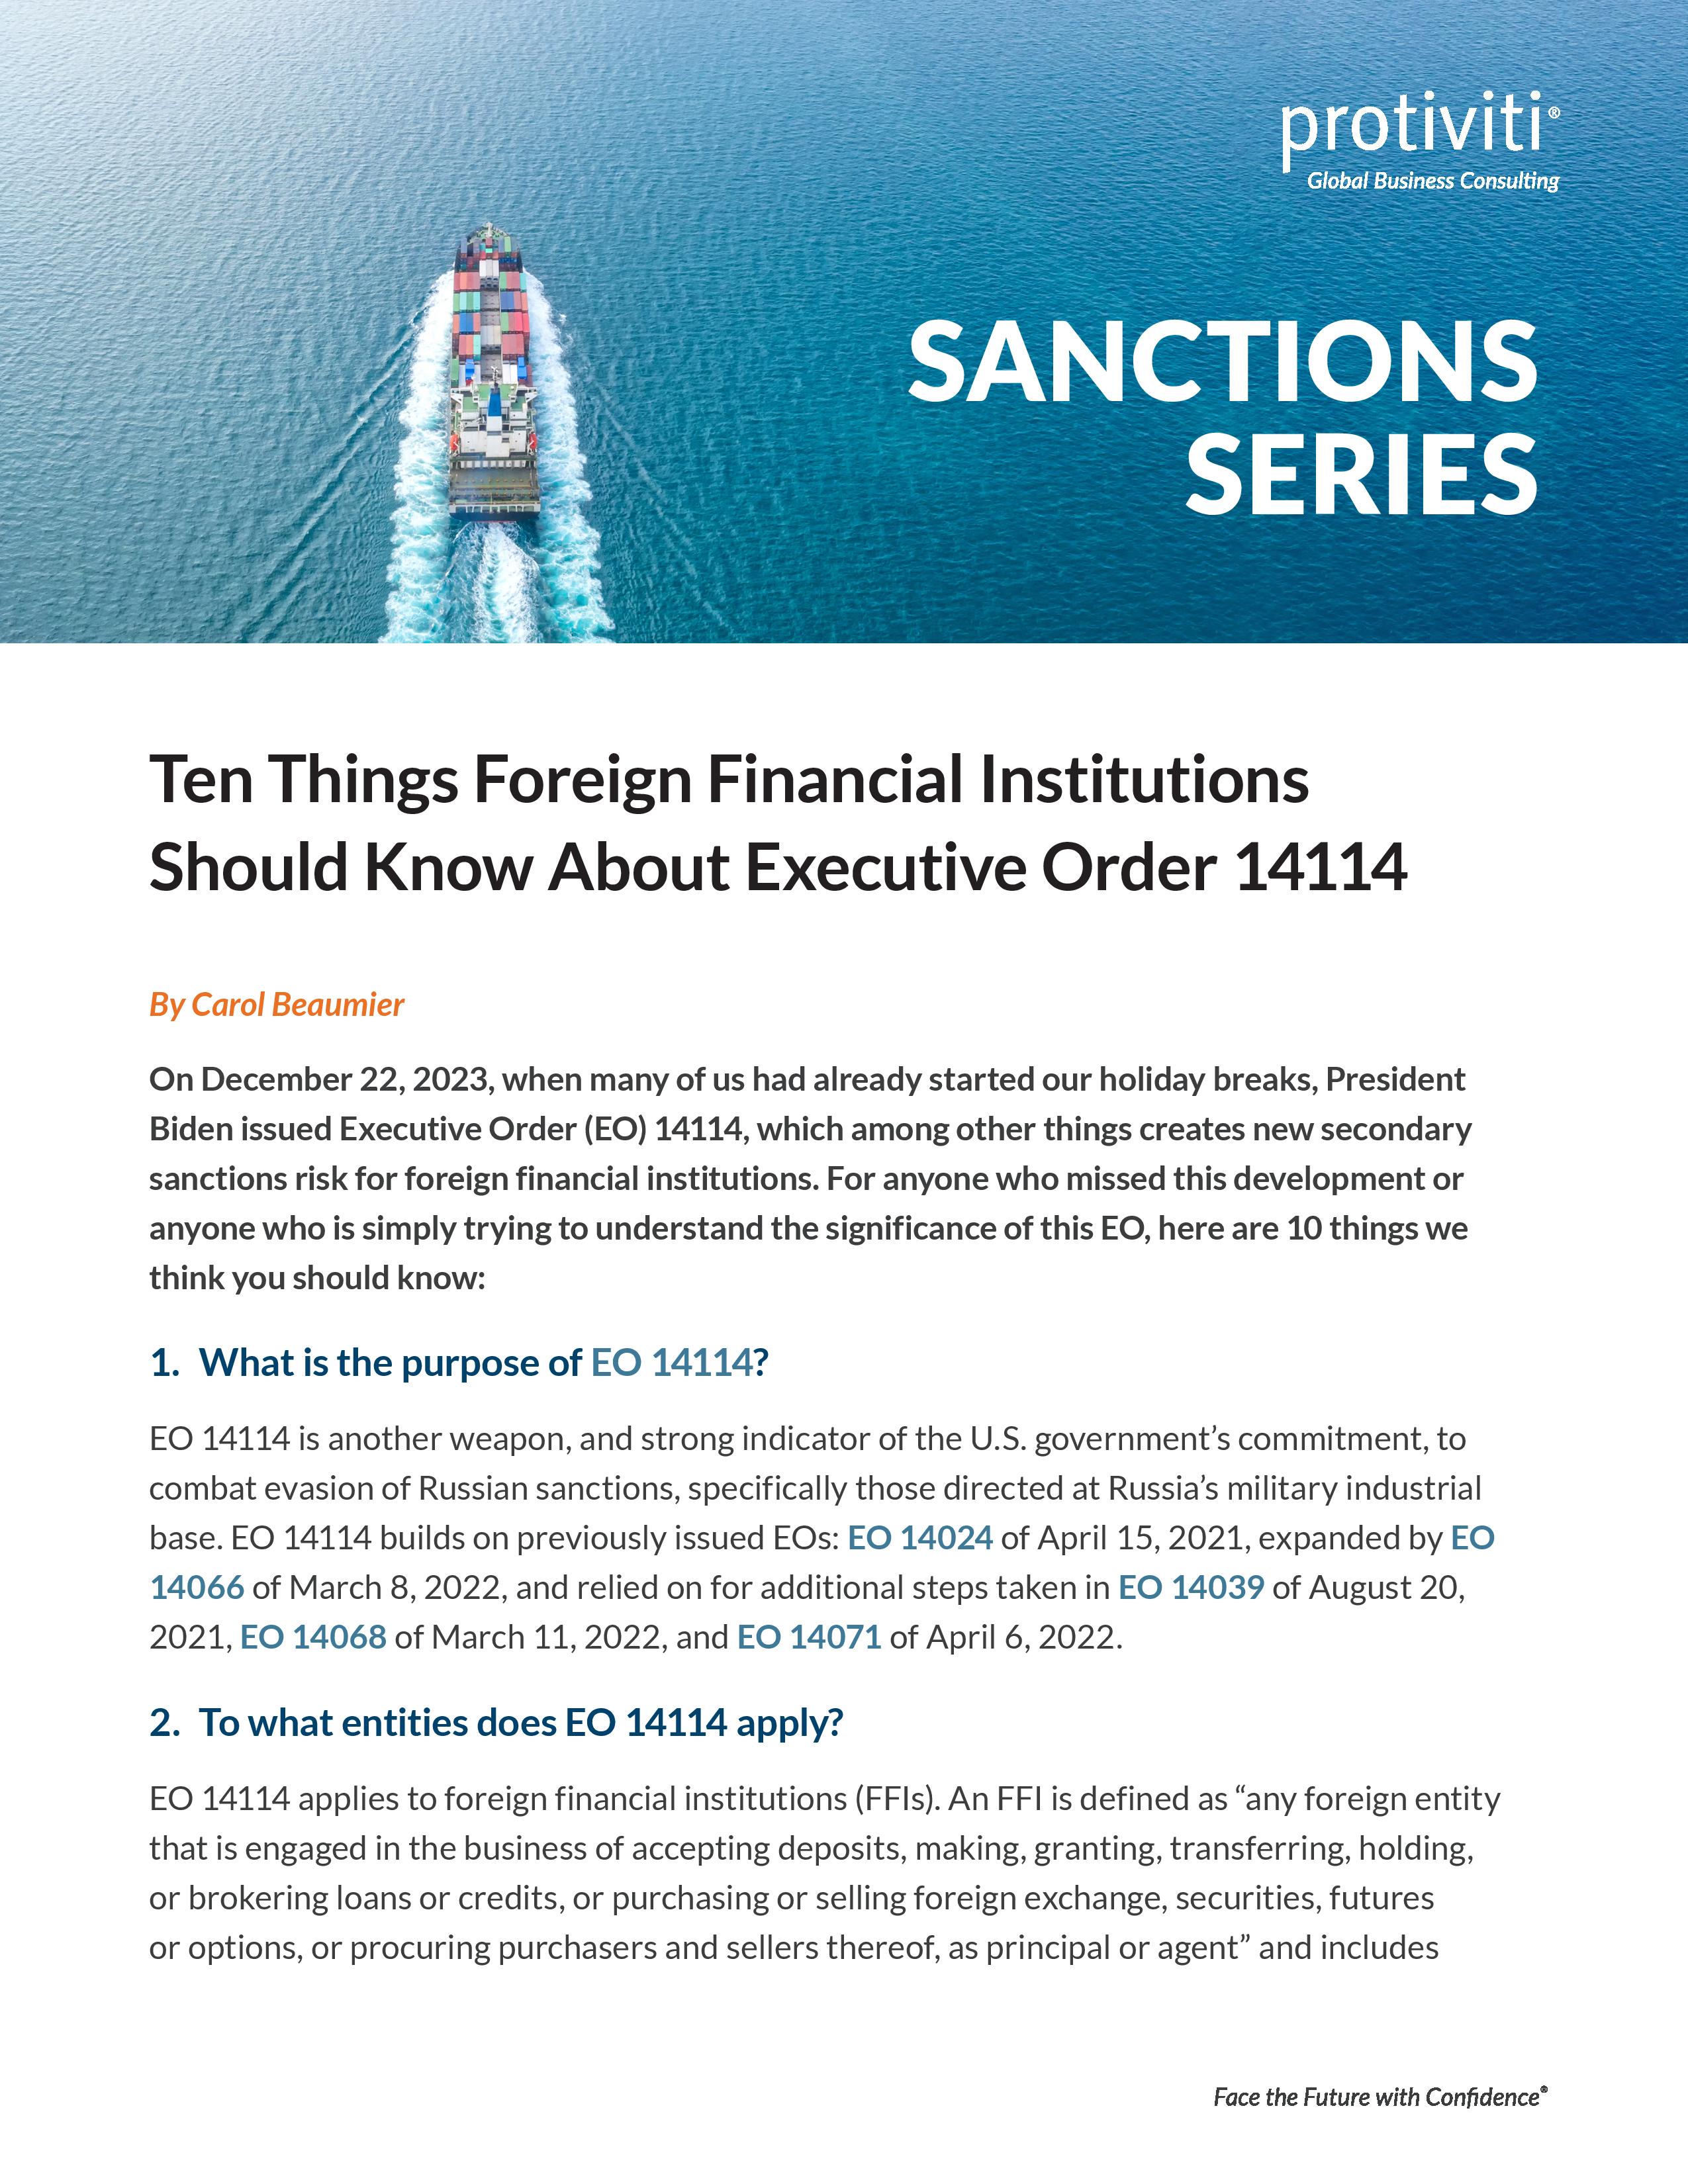 screenshot of the first page of Ten Things Foreign Financial Institutions Should Know About Executive Order 14114